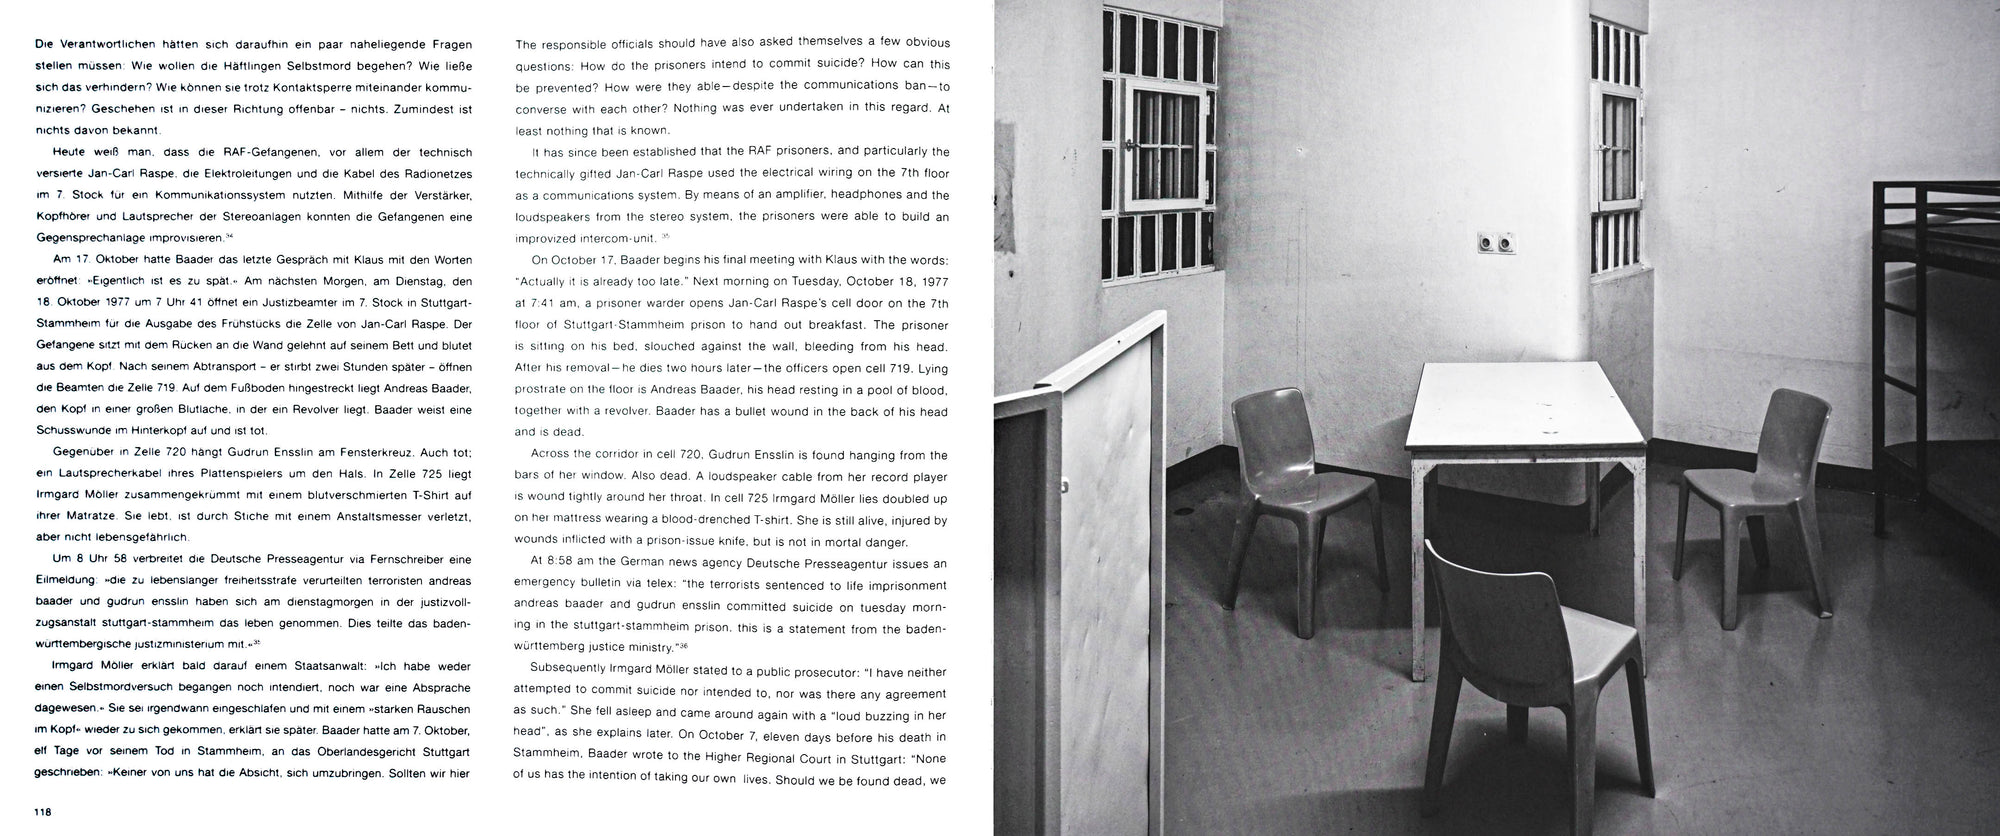 Book spread with black type and a black and white image of a prison interior 